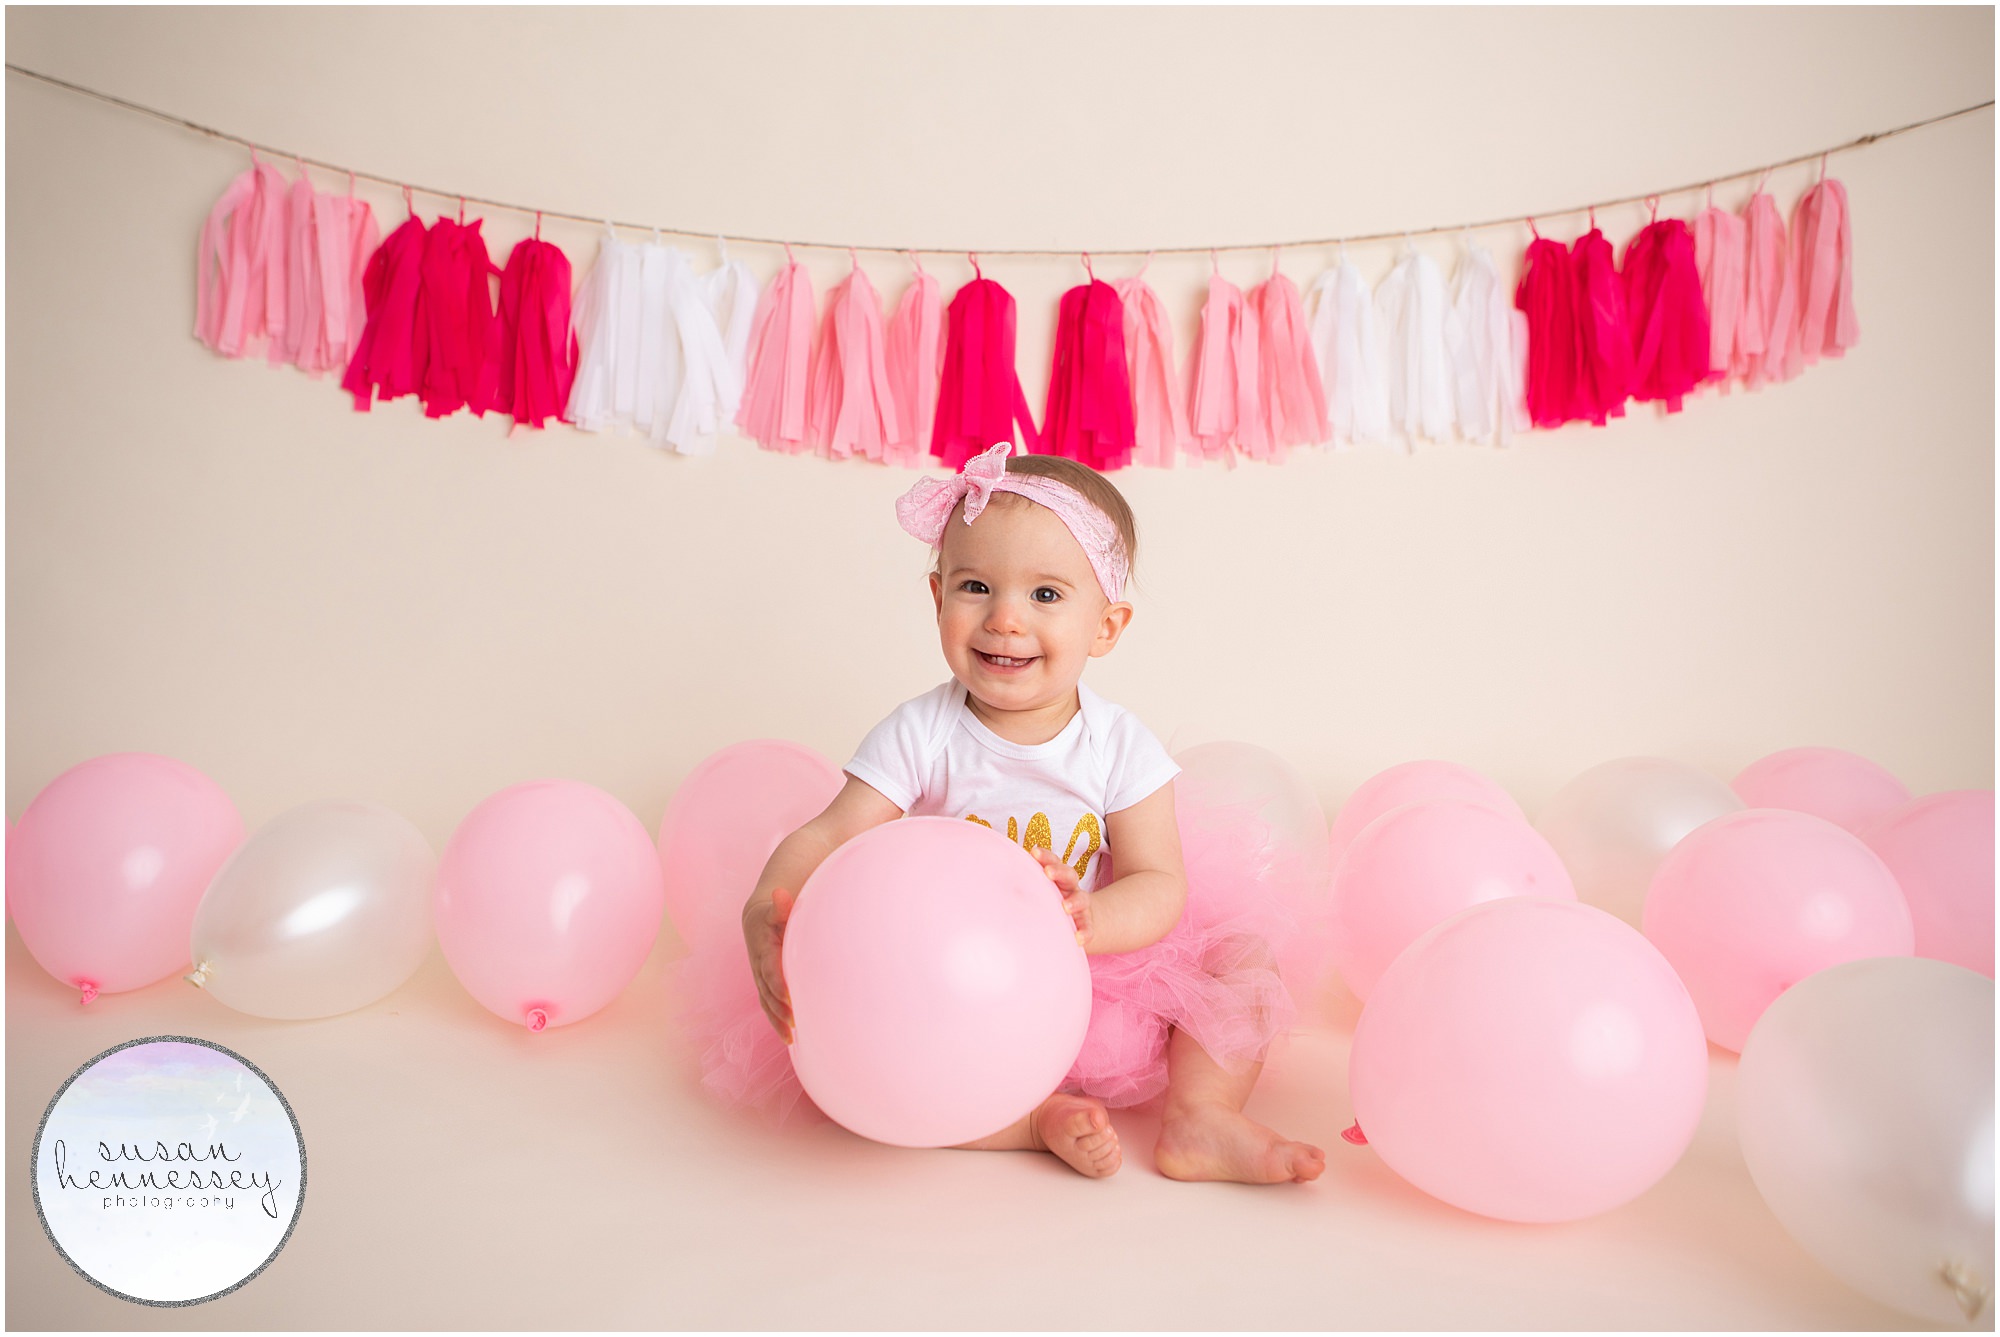 Norah had a pink and white cake smash photo session